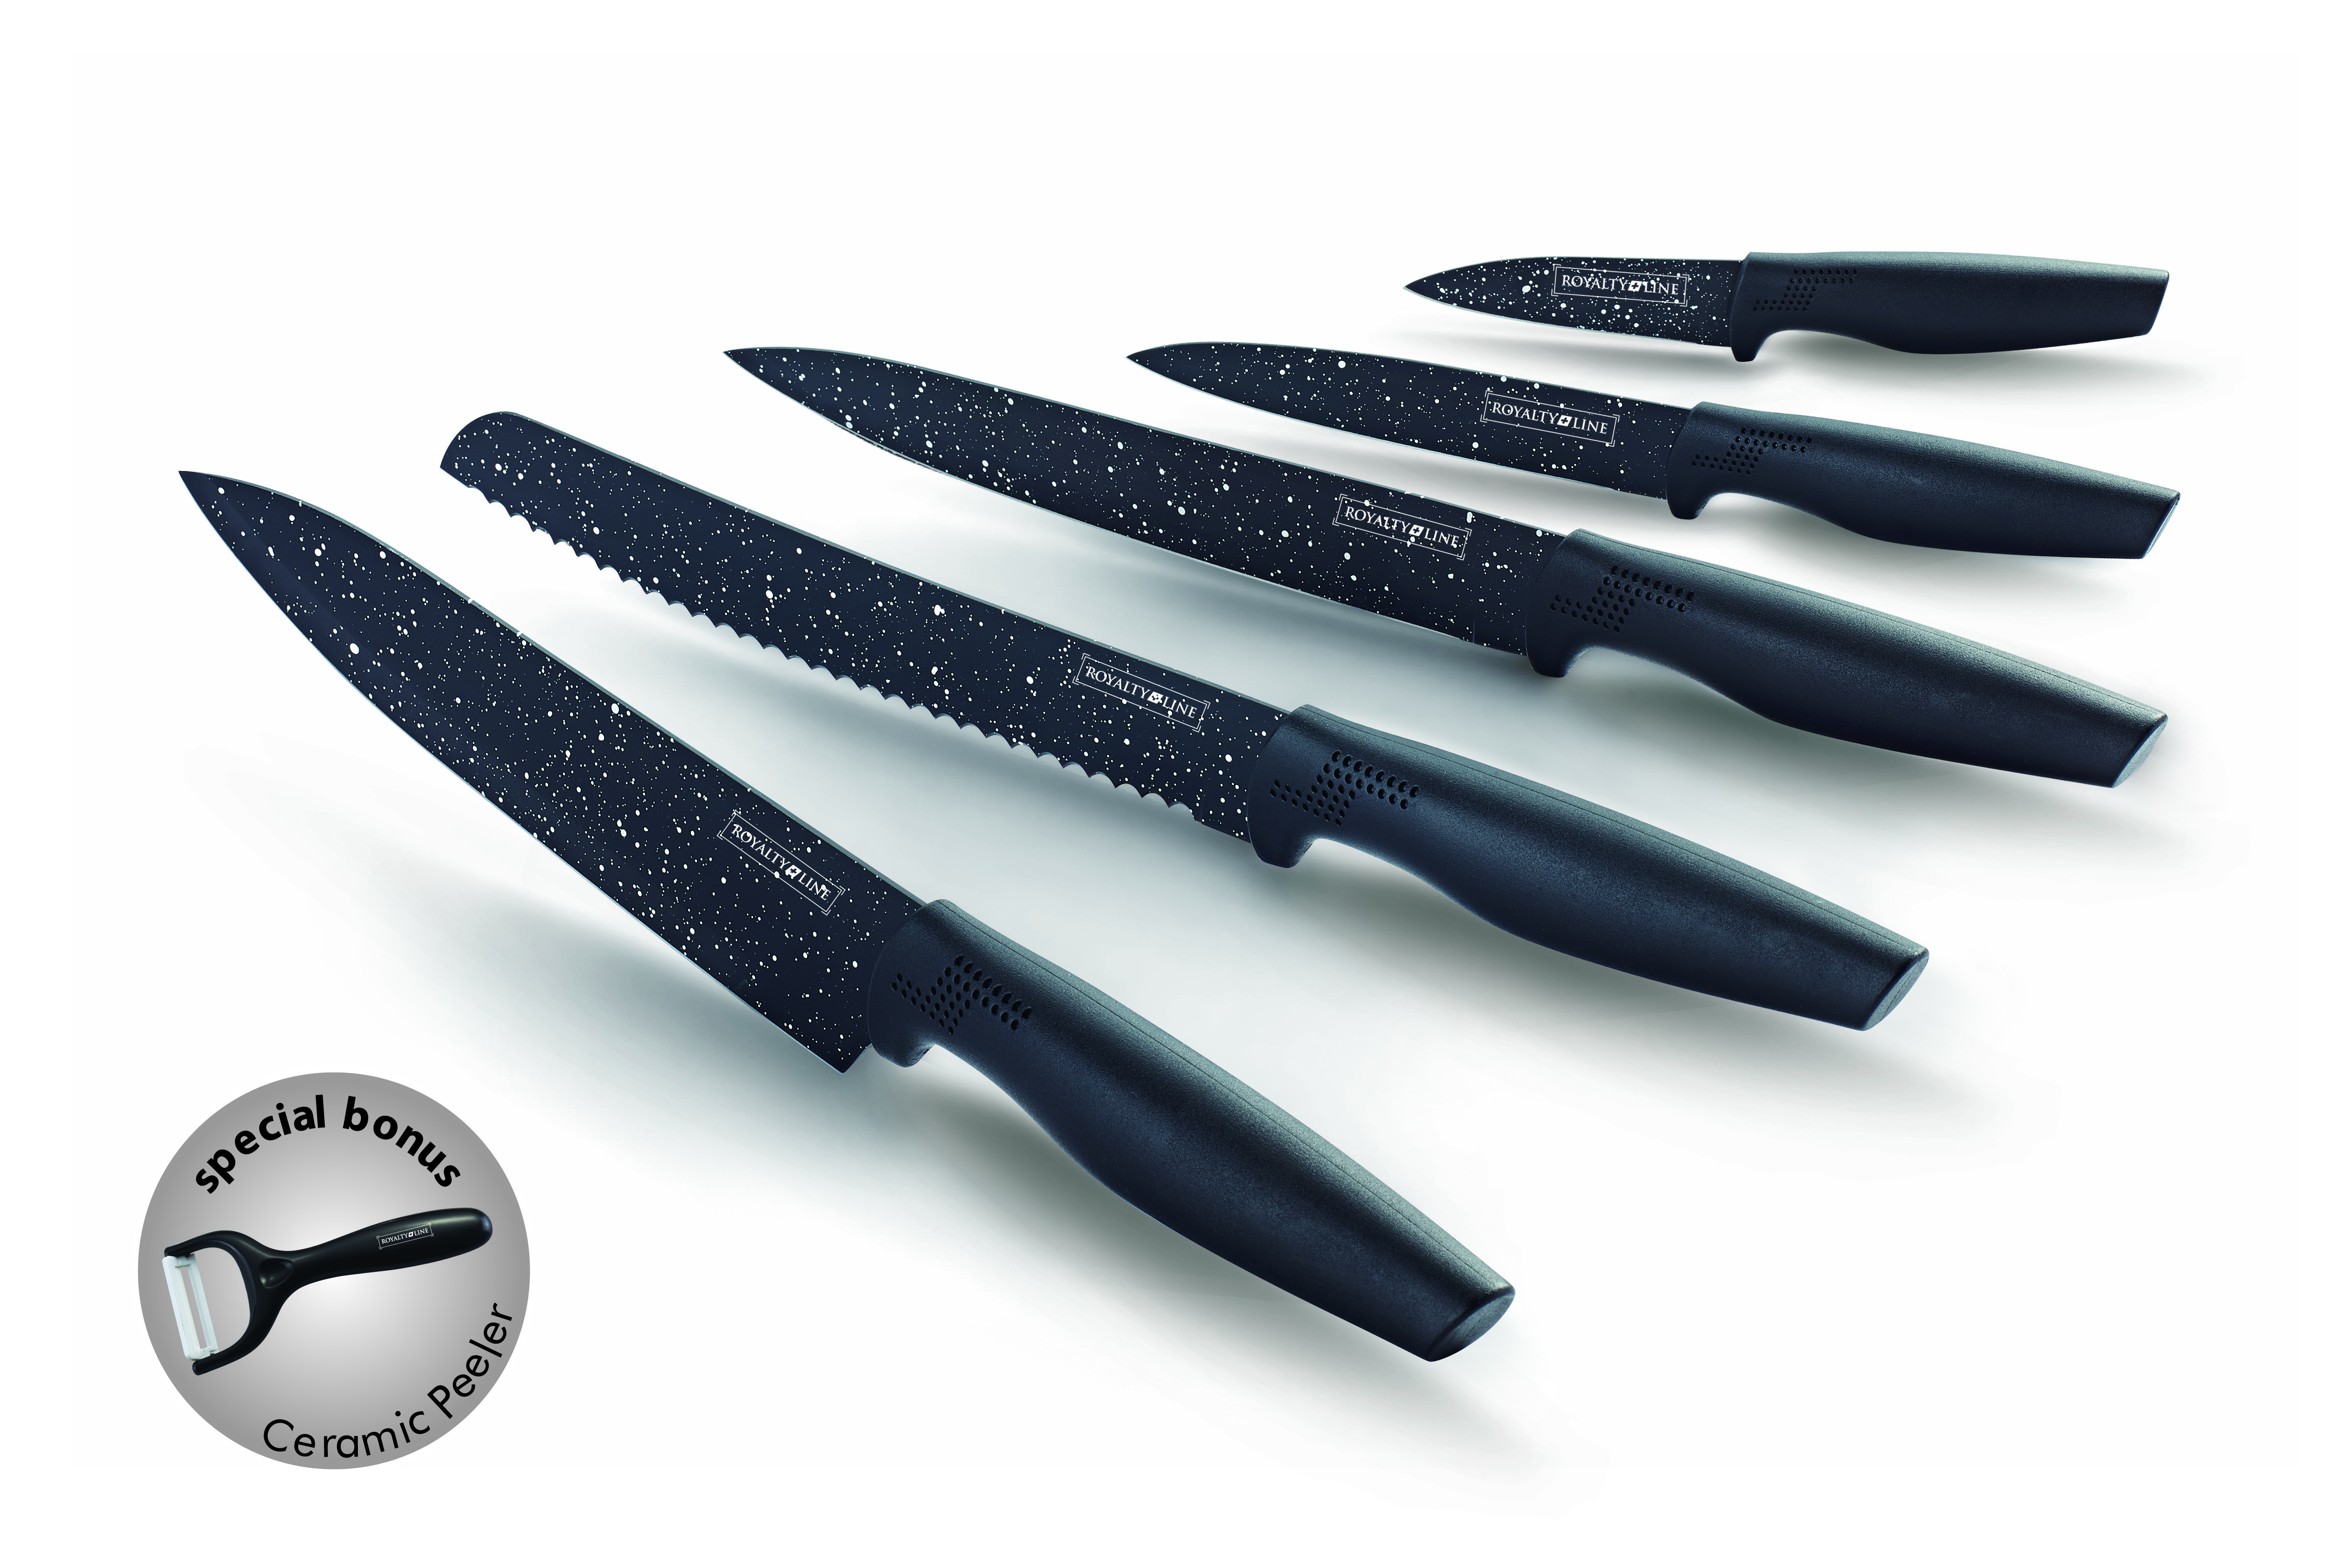 Royalty Line 6-Piece Non-Stick Coating Knife Set With Stand